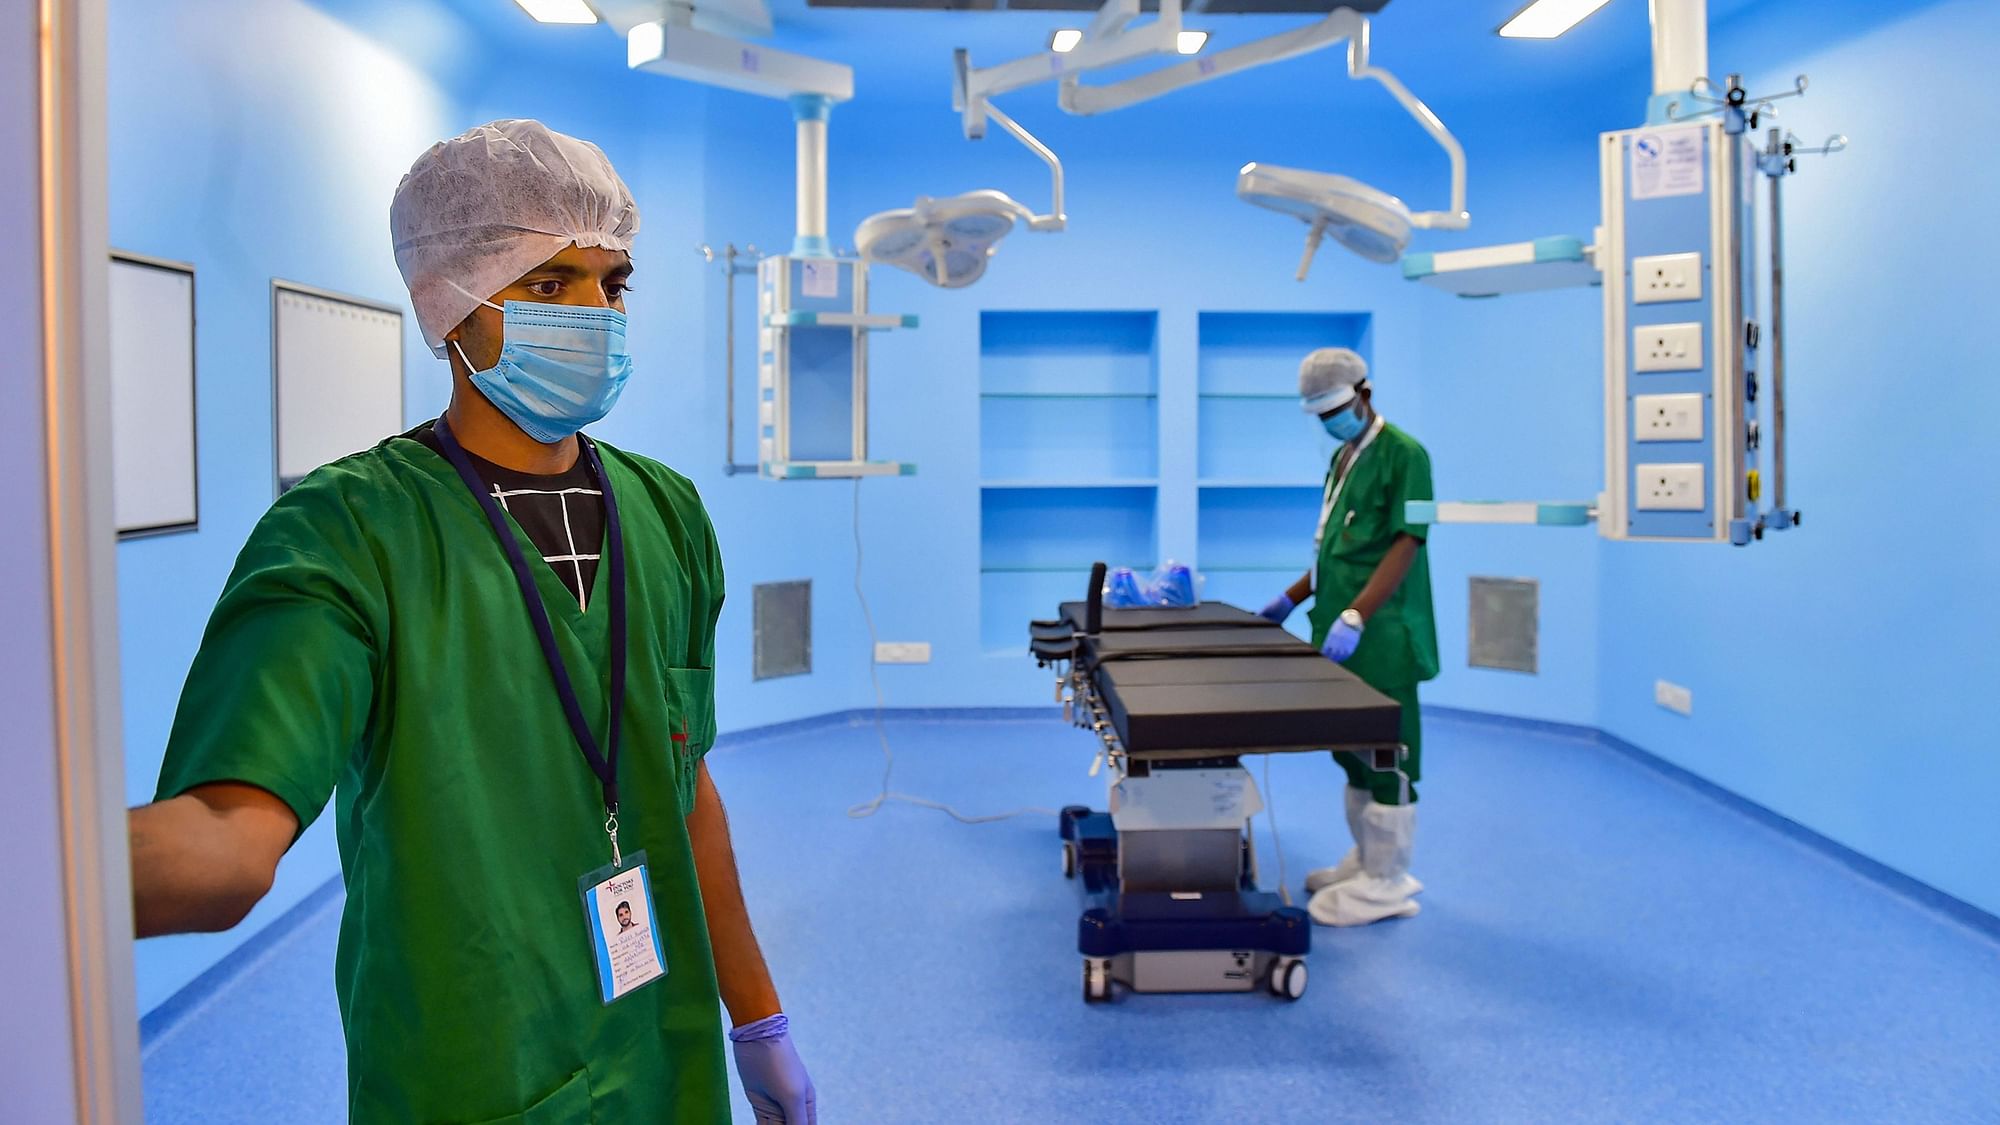 Workers prepare an OT (Operation Theatre) at an ICU ward, specially for COVID-19 patients, during its inauguration in Bengaluru, on Wednesday, 26 August, 2020.